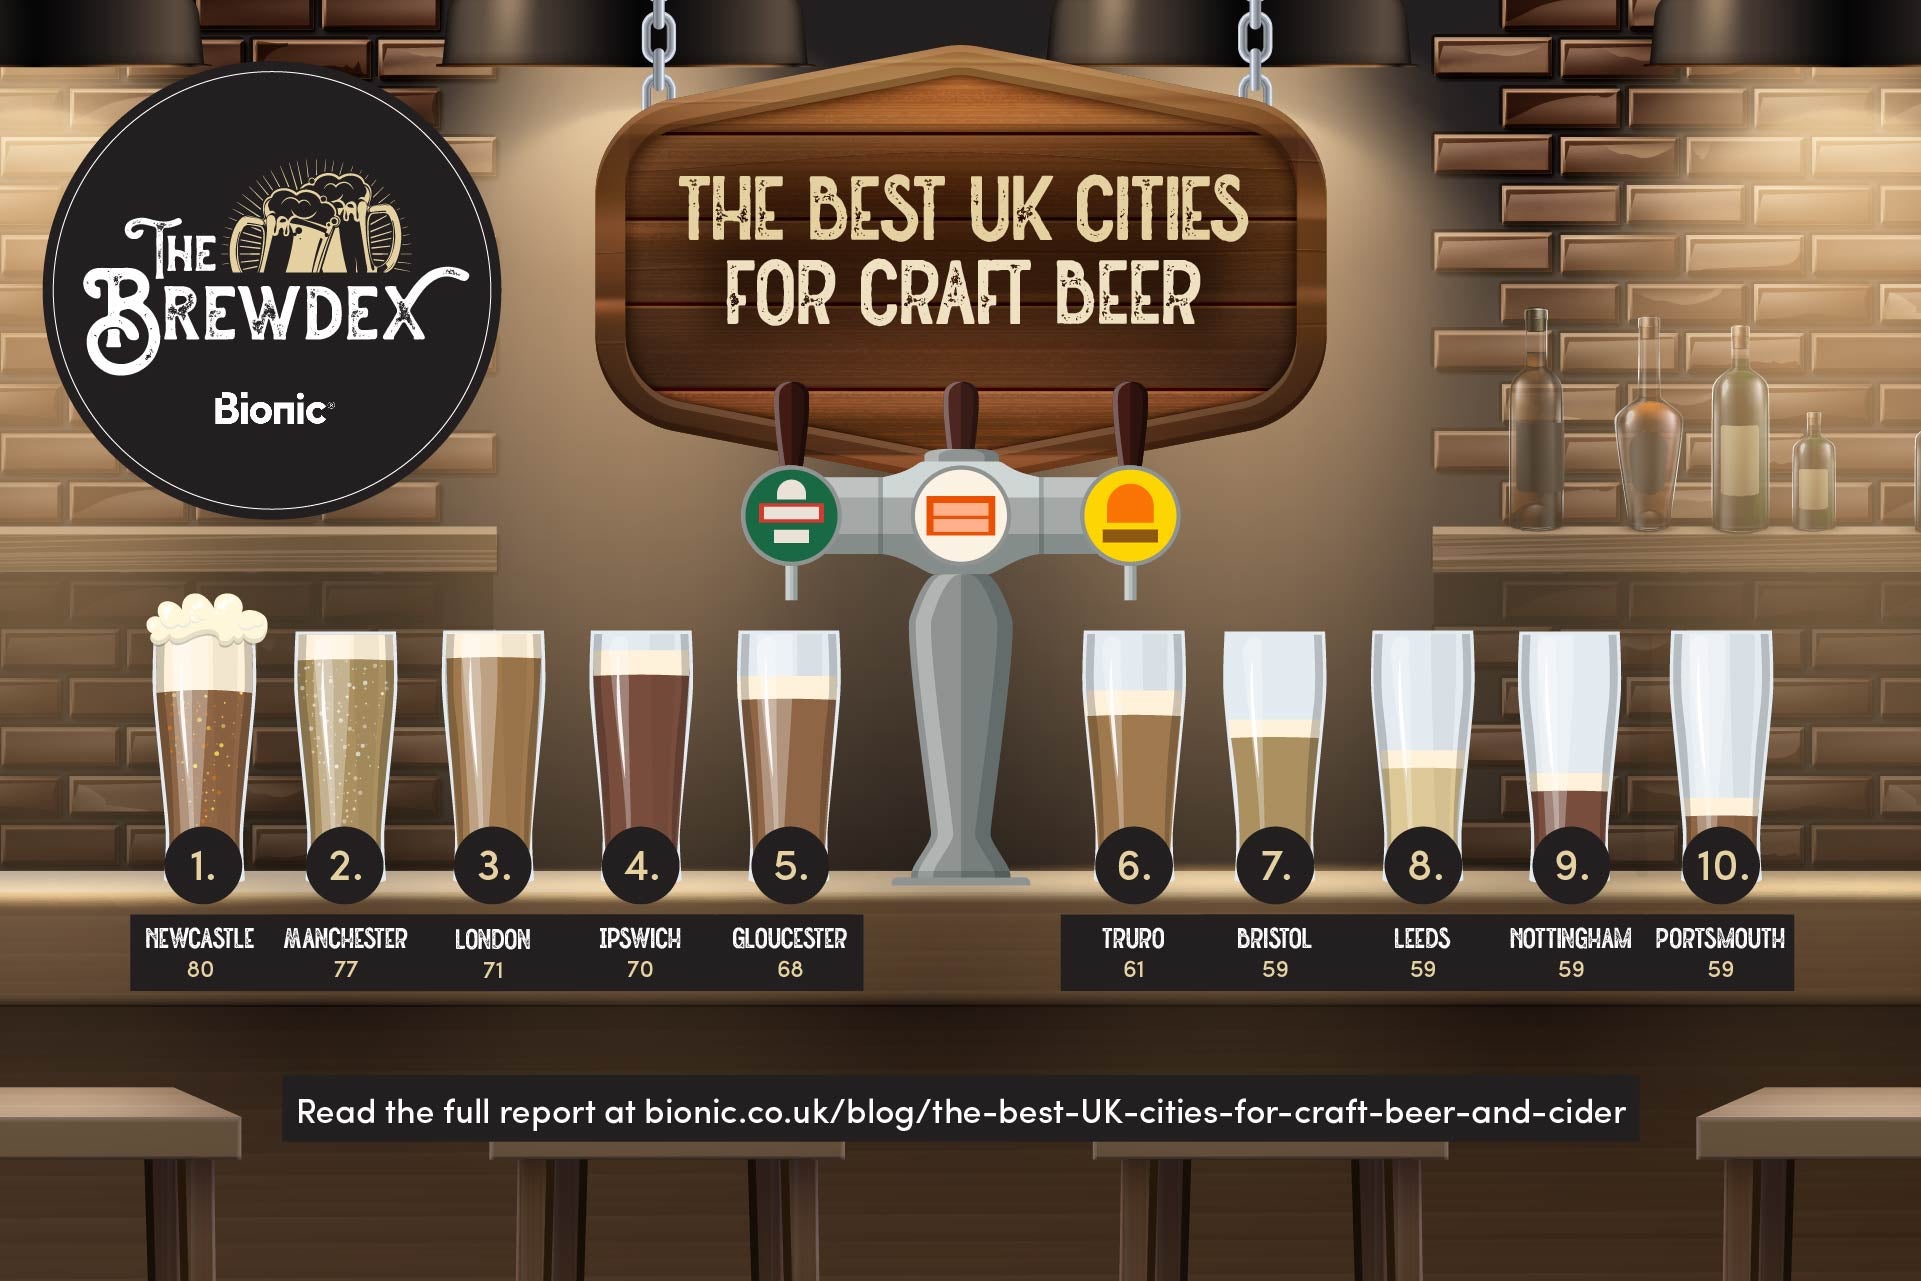 A bar top with ten pints of beer, each representing the best UK cities for craft beer